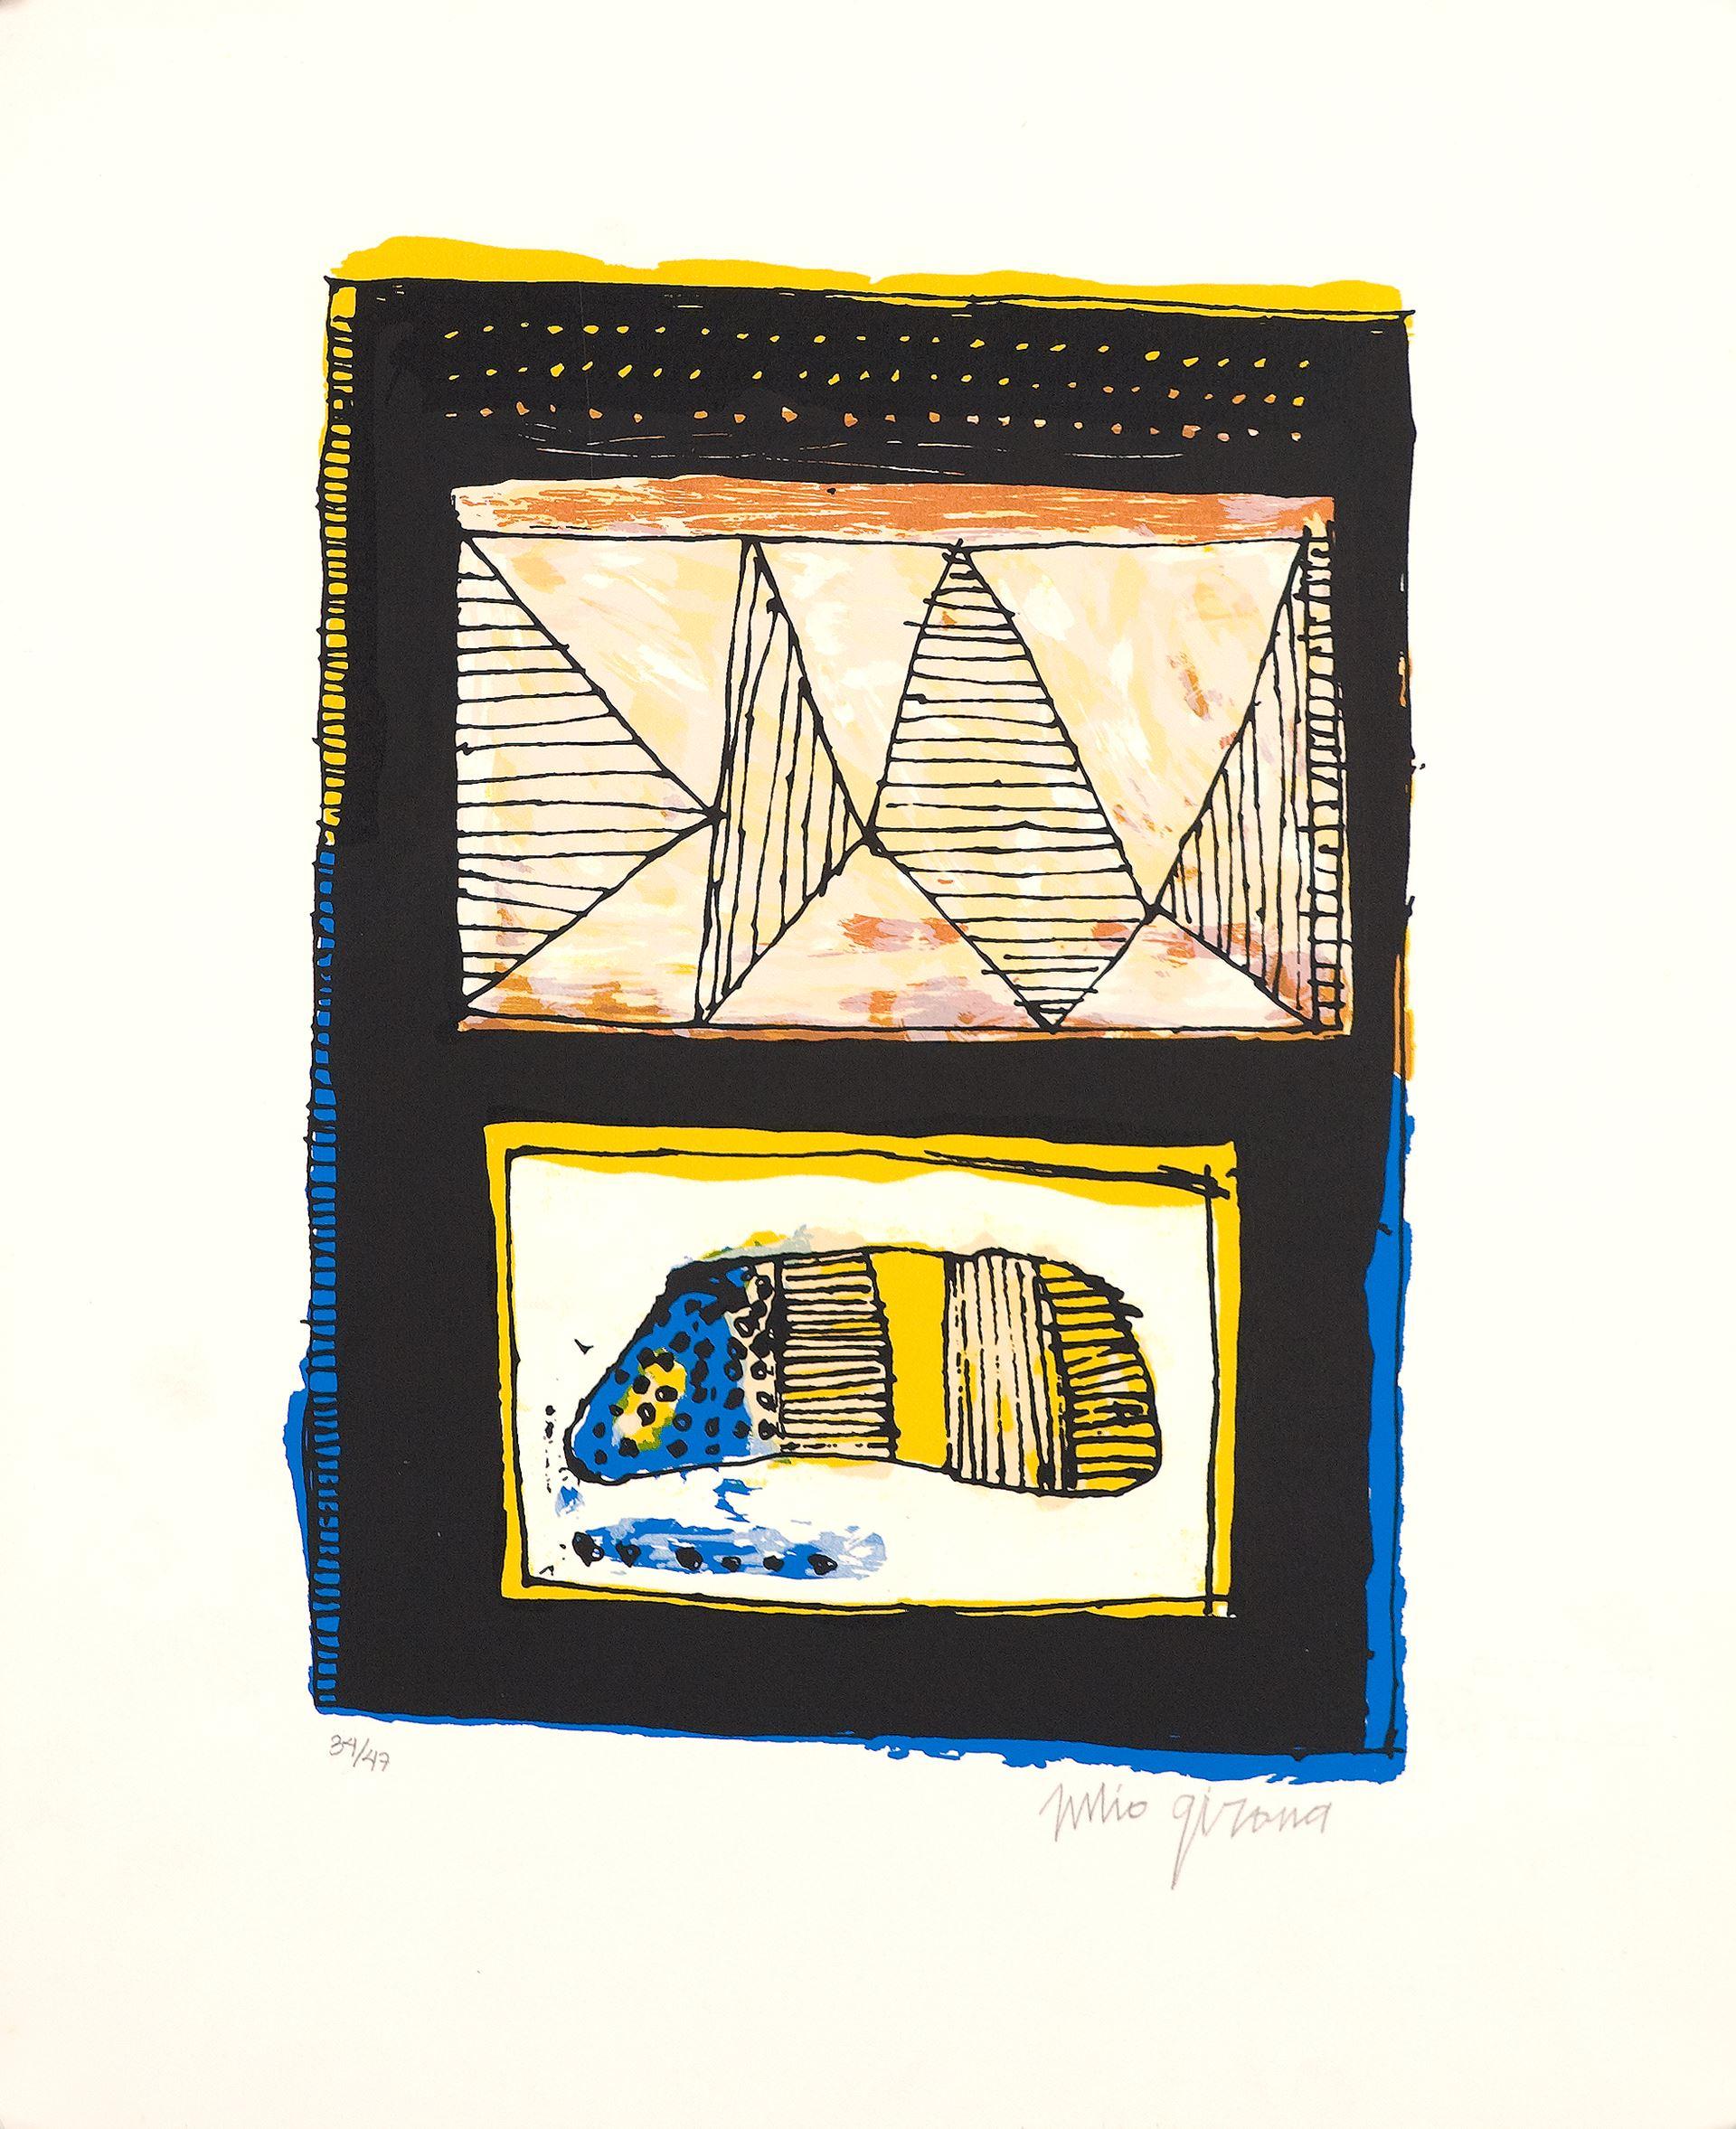 "Julio Girona (Cuba, 1914-2002)
'Paisajes mentales', 1999
silkscreen on paper
19.7 x 14.2 in. (50 x 36 cm.)
Edition of 47
ID: GIR1066-005-047"

"Julio Girona is a Cuban artist who has worked in various media, including painting, drawing,